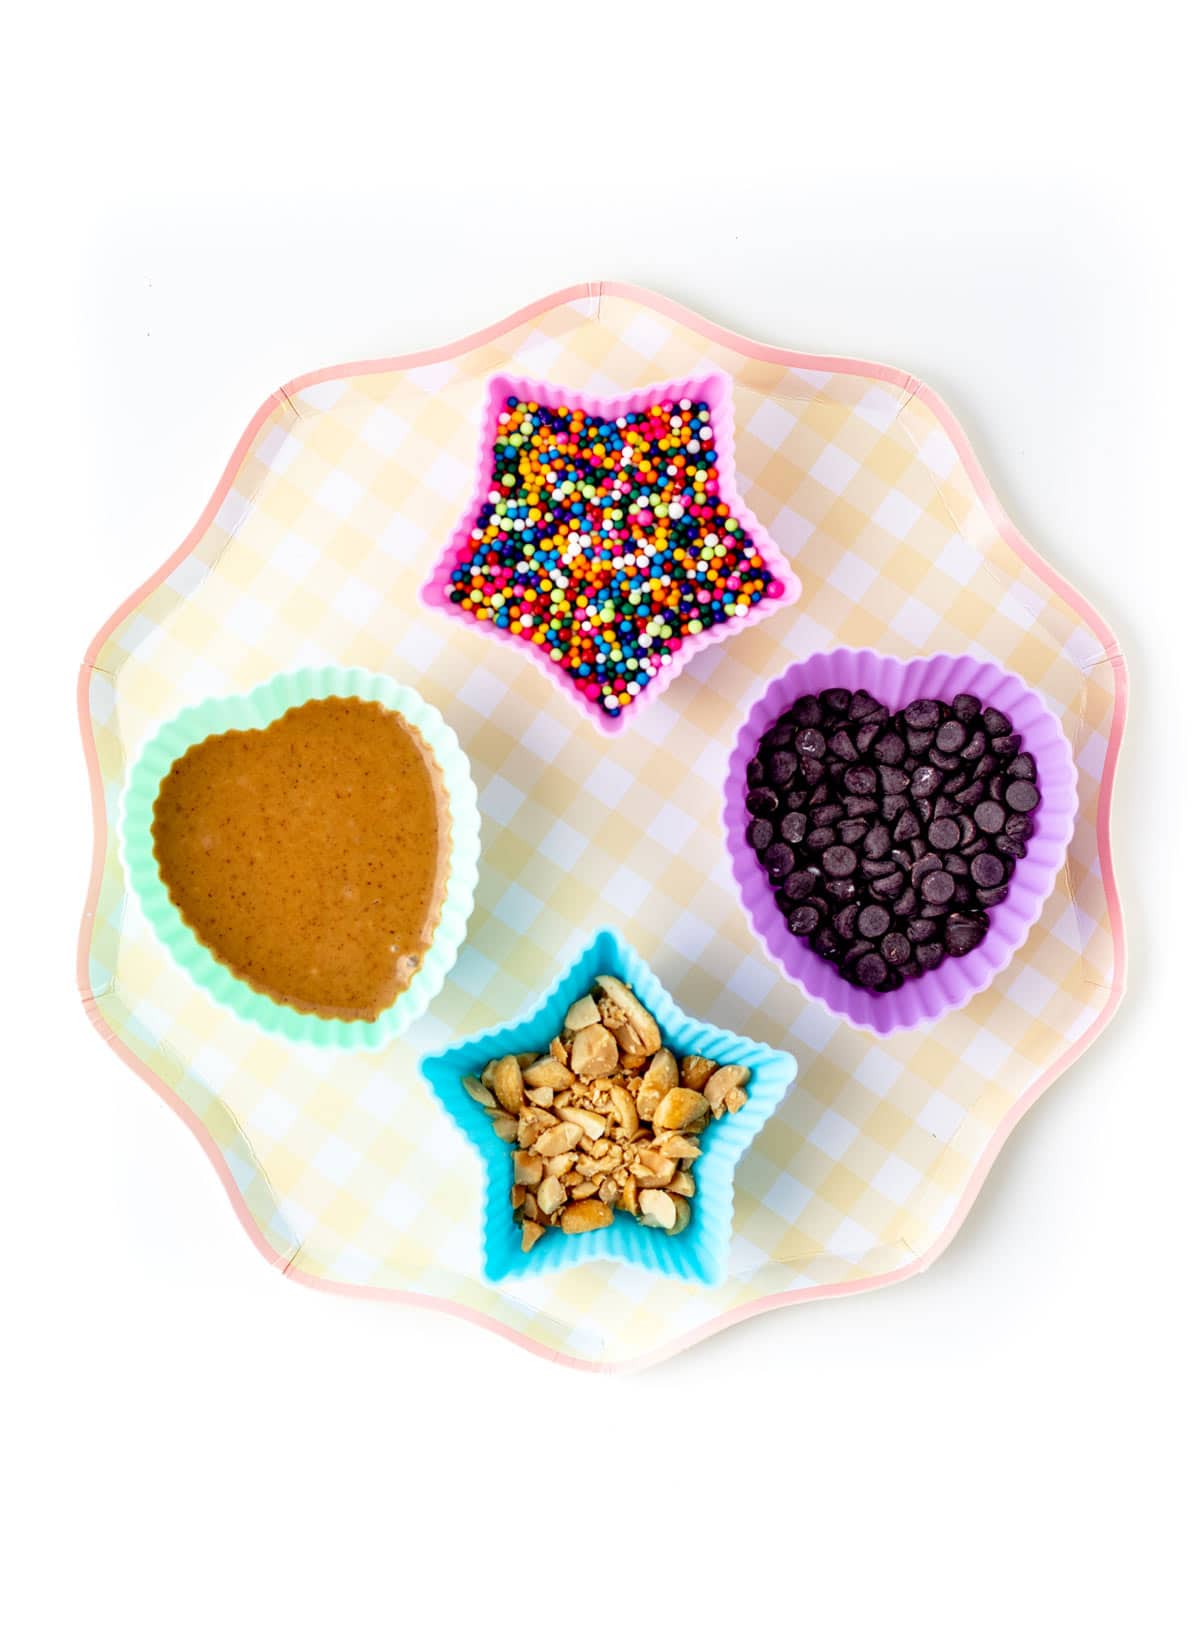 Four different shapes of bowls filled with various toppings for the frozen banana pops with yogurt.